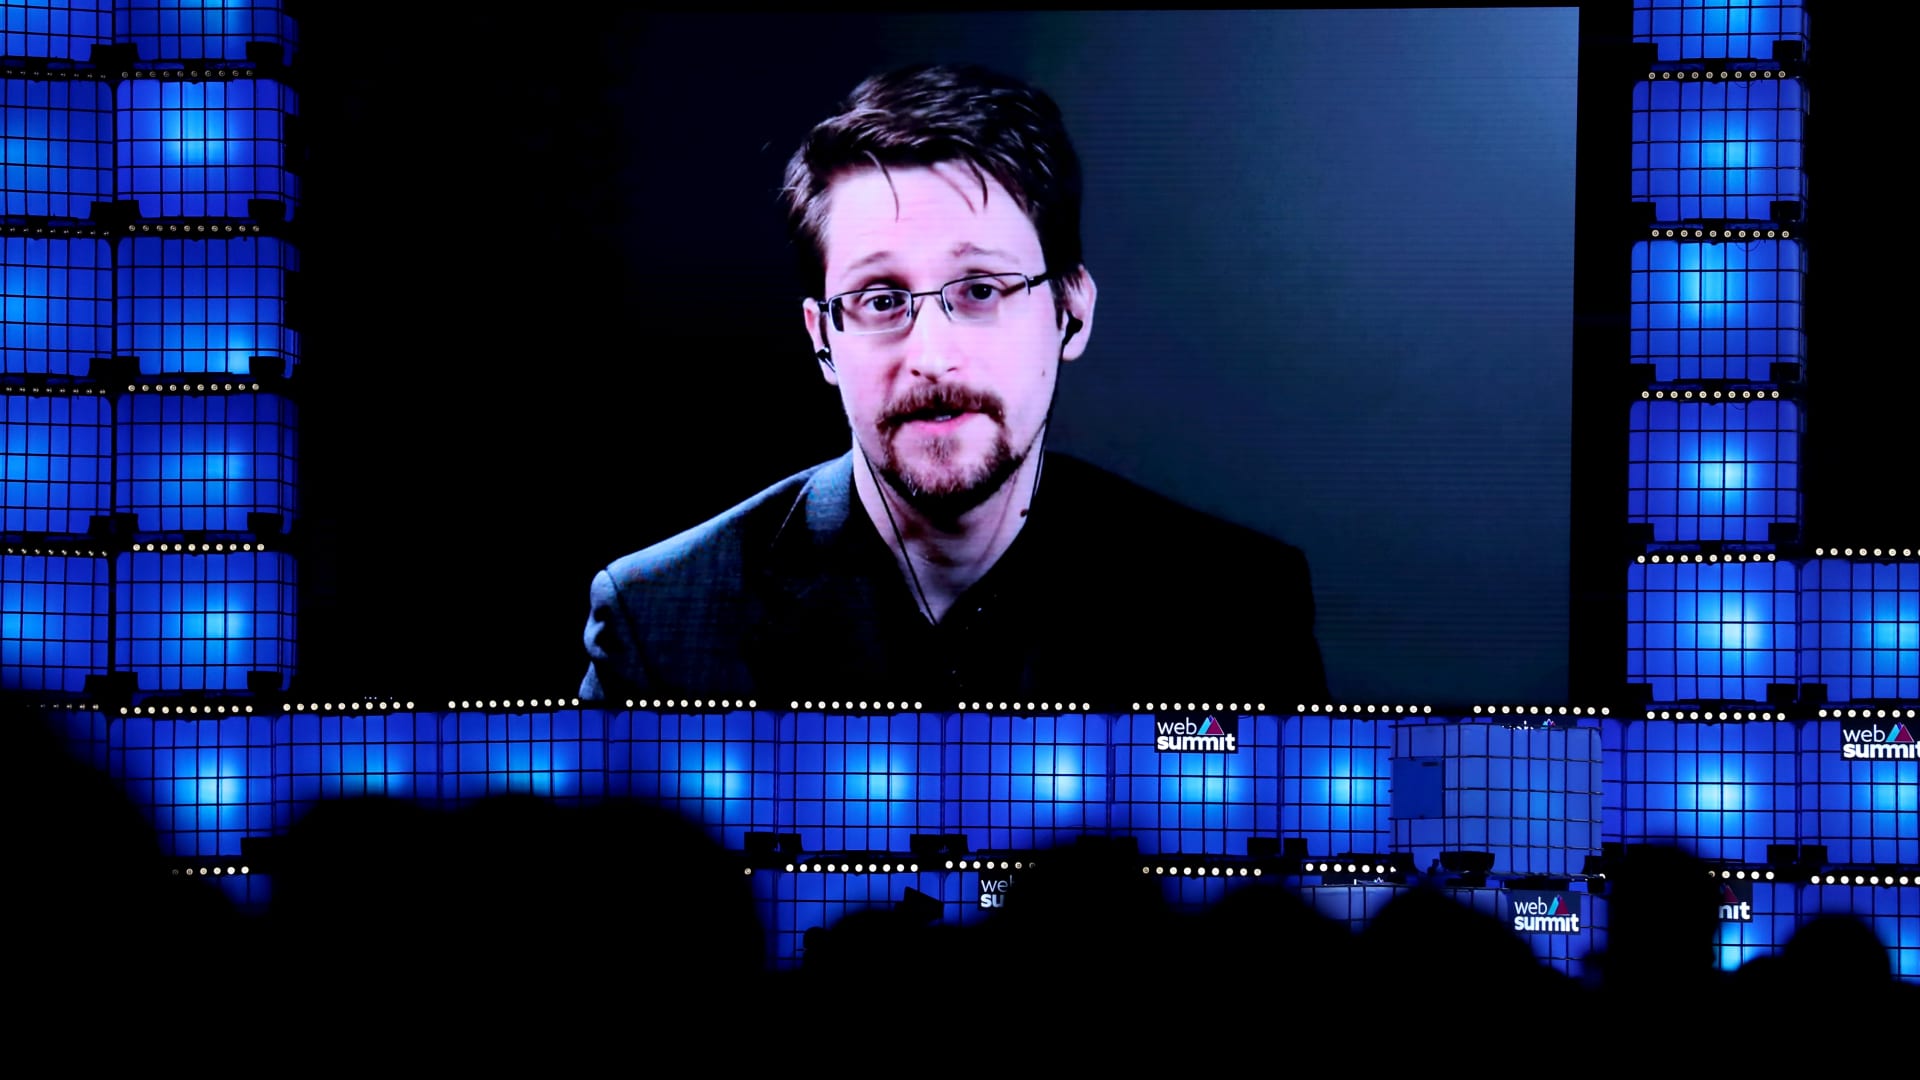 NSA whistleblower Edward Snowden speaks live from Russia during the Web Summit technology conference in Lisbon, Portugal on November 4, 2019.